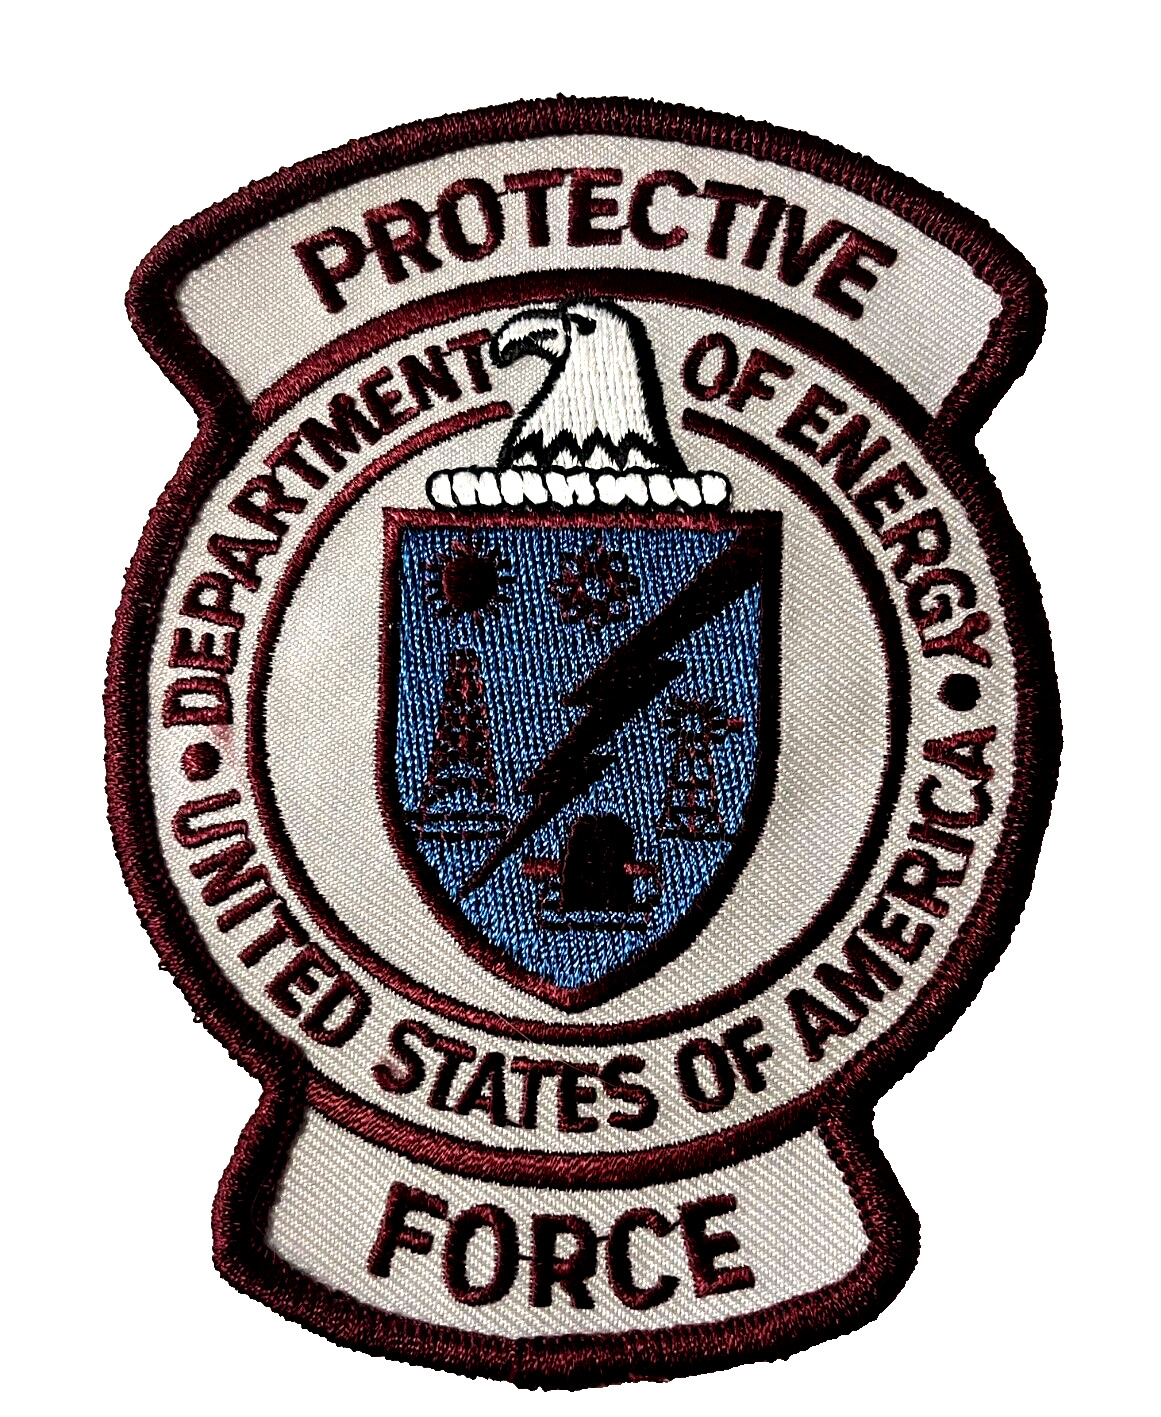 DEPARTMENT OF ENERGY PROTECTIVE FORCE PATCH (SPC 6)